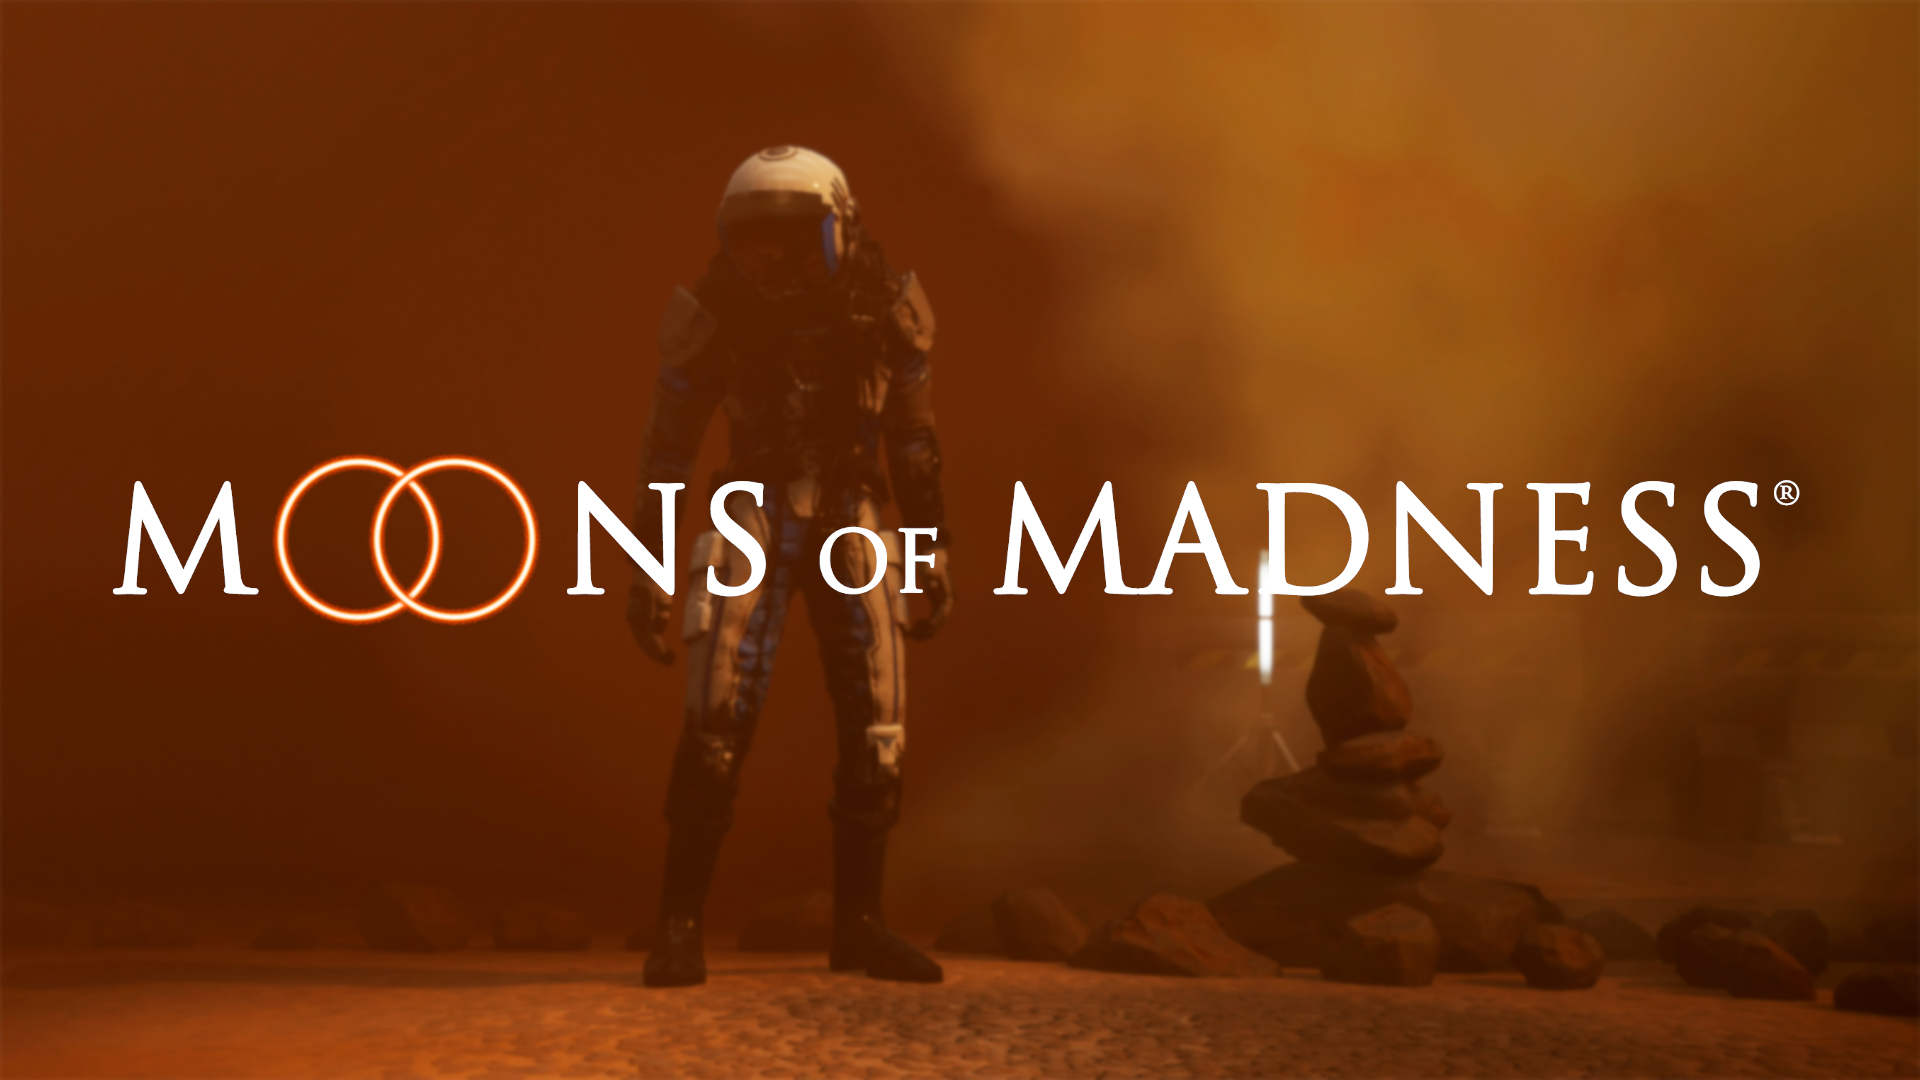 Moons of madness steam фото 105